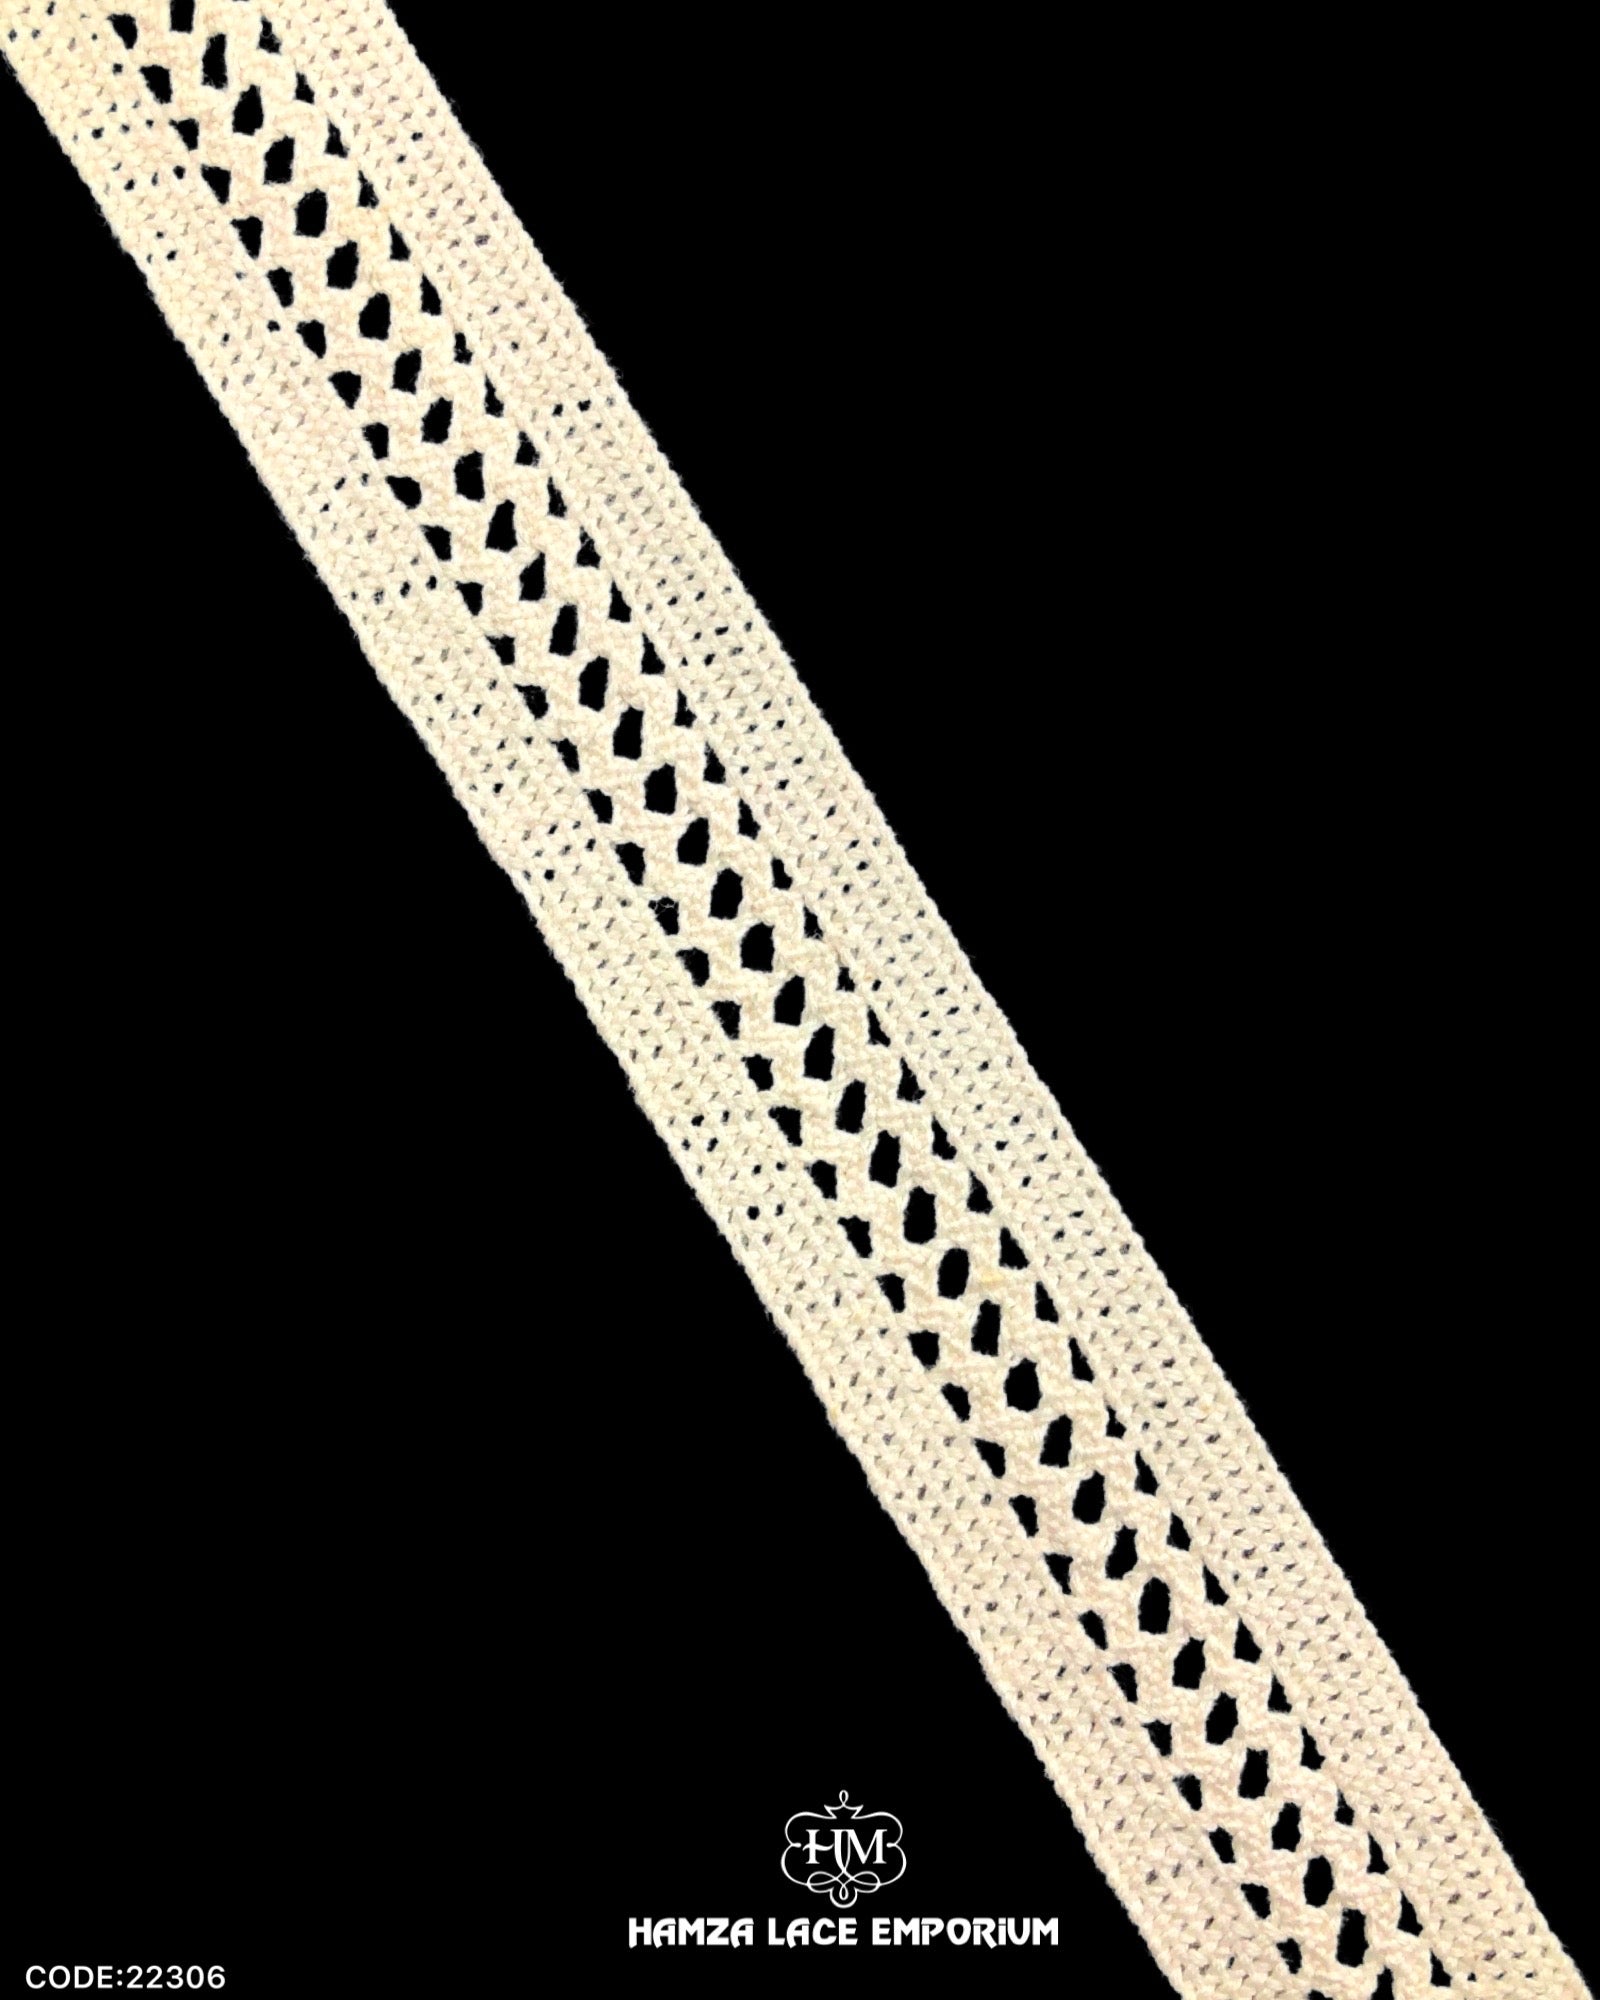 'Center Filling Crochet Lace 22306' with the brand name 'Hamza Lace' written at the bottom